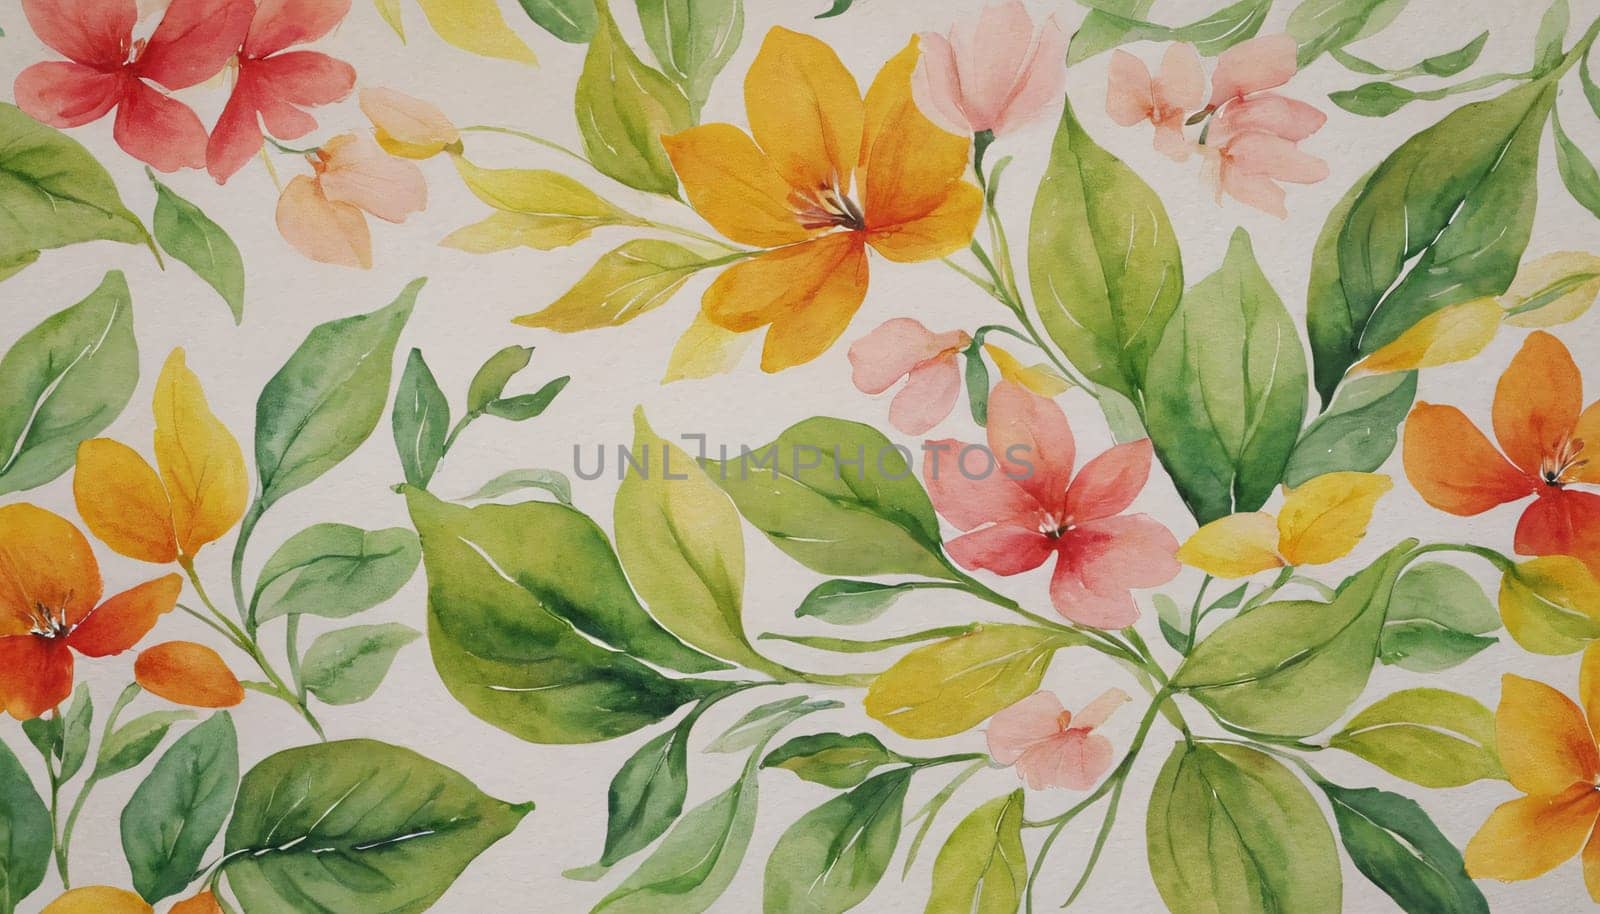 a watercolor painting of a bunch of flowers, botanical background.